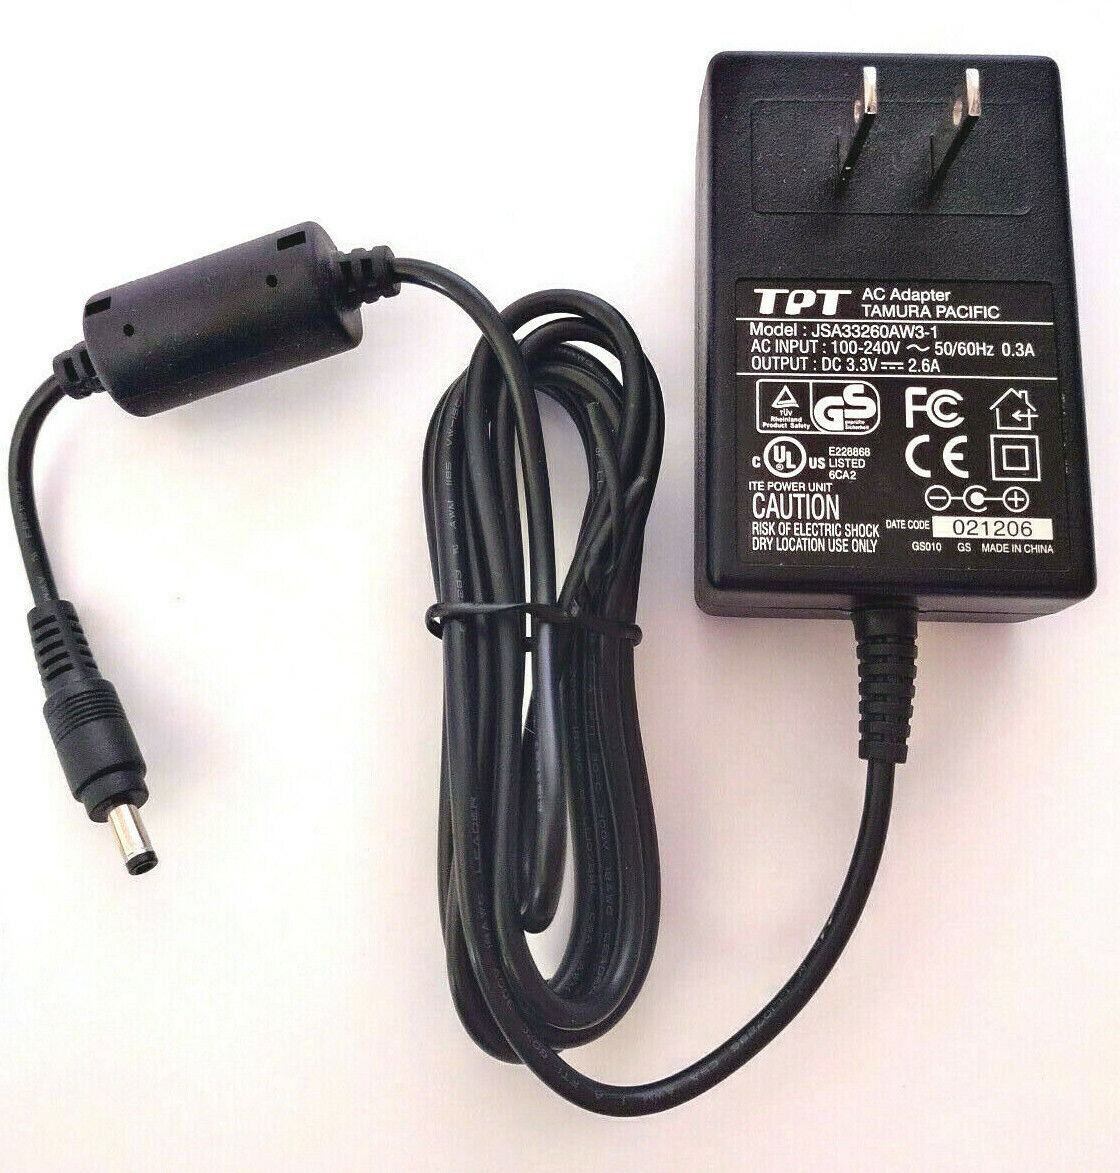 *Brand NEW* Transformer Charger TPT JSA33260AW3-1 AC Adapter DC 3V 2.6 ITE Power Supply